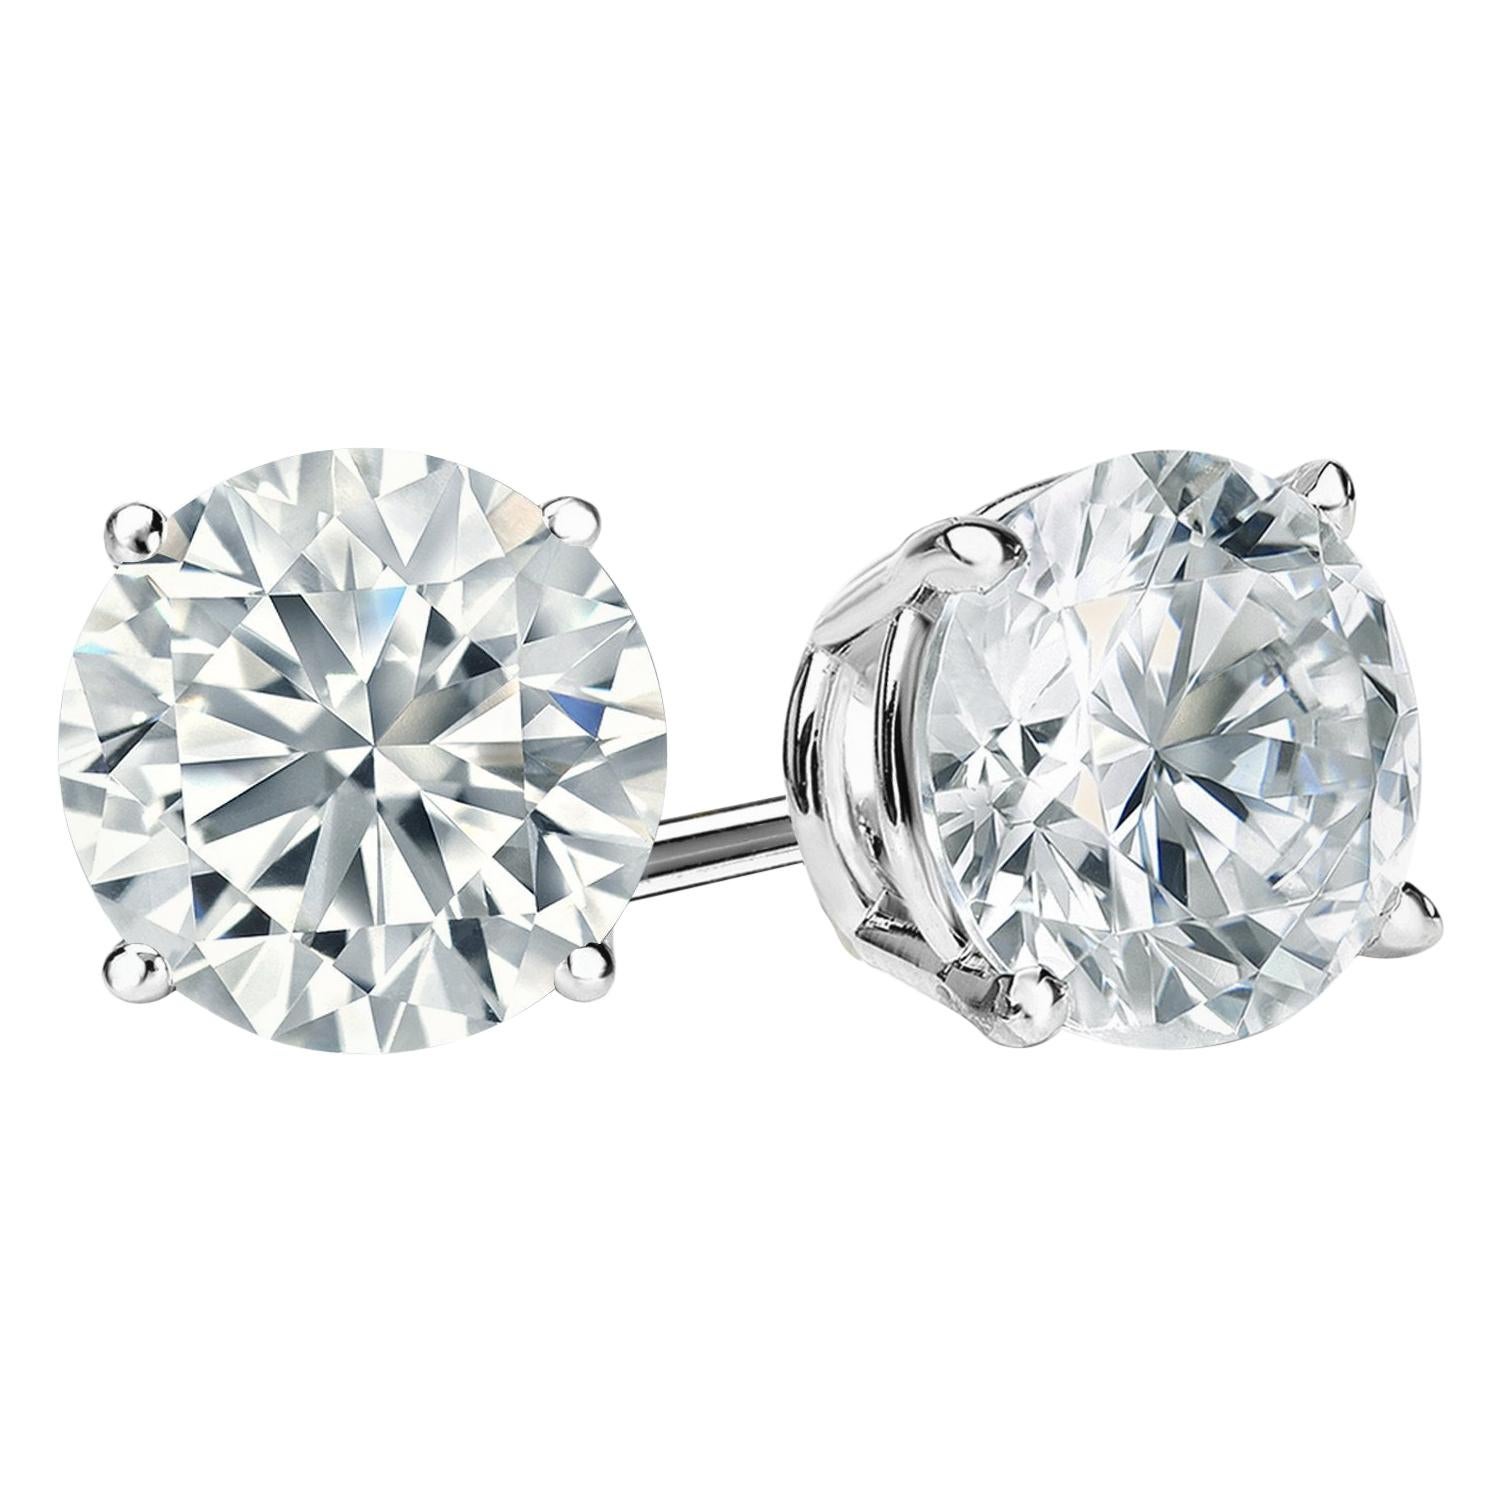 Beauvince GIA IVS2 Certified 14.01 Carat Round Solitaire Diamond Studs